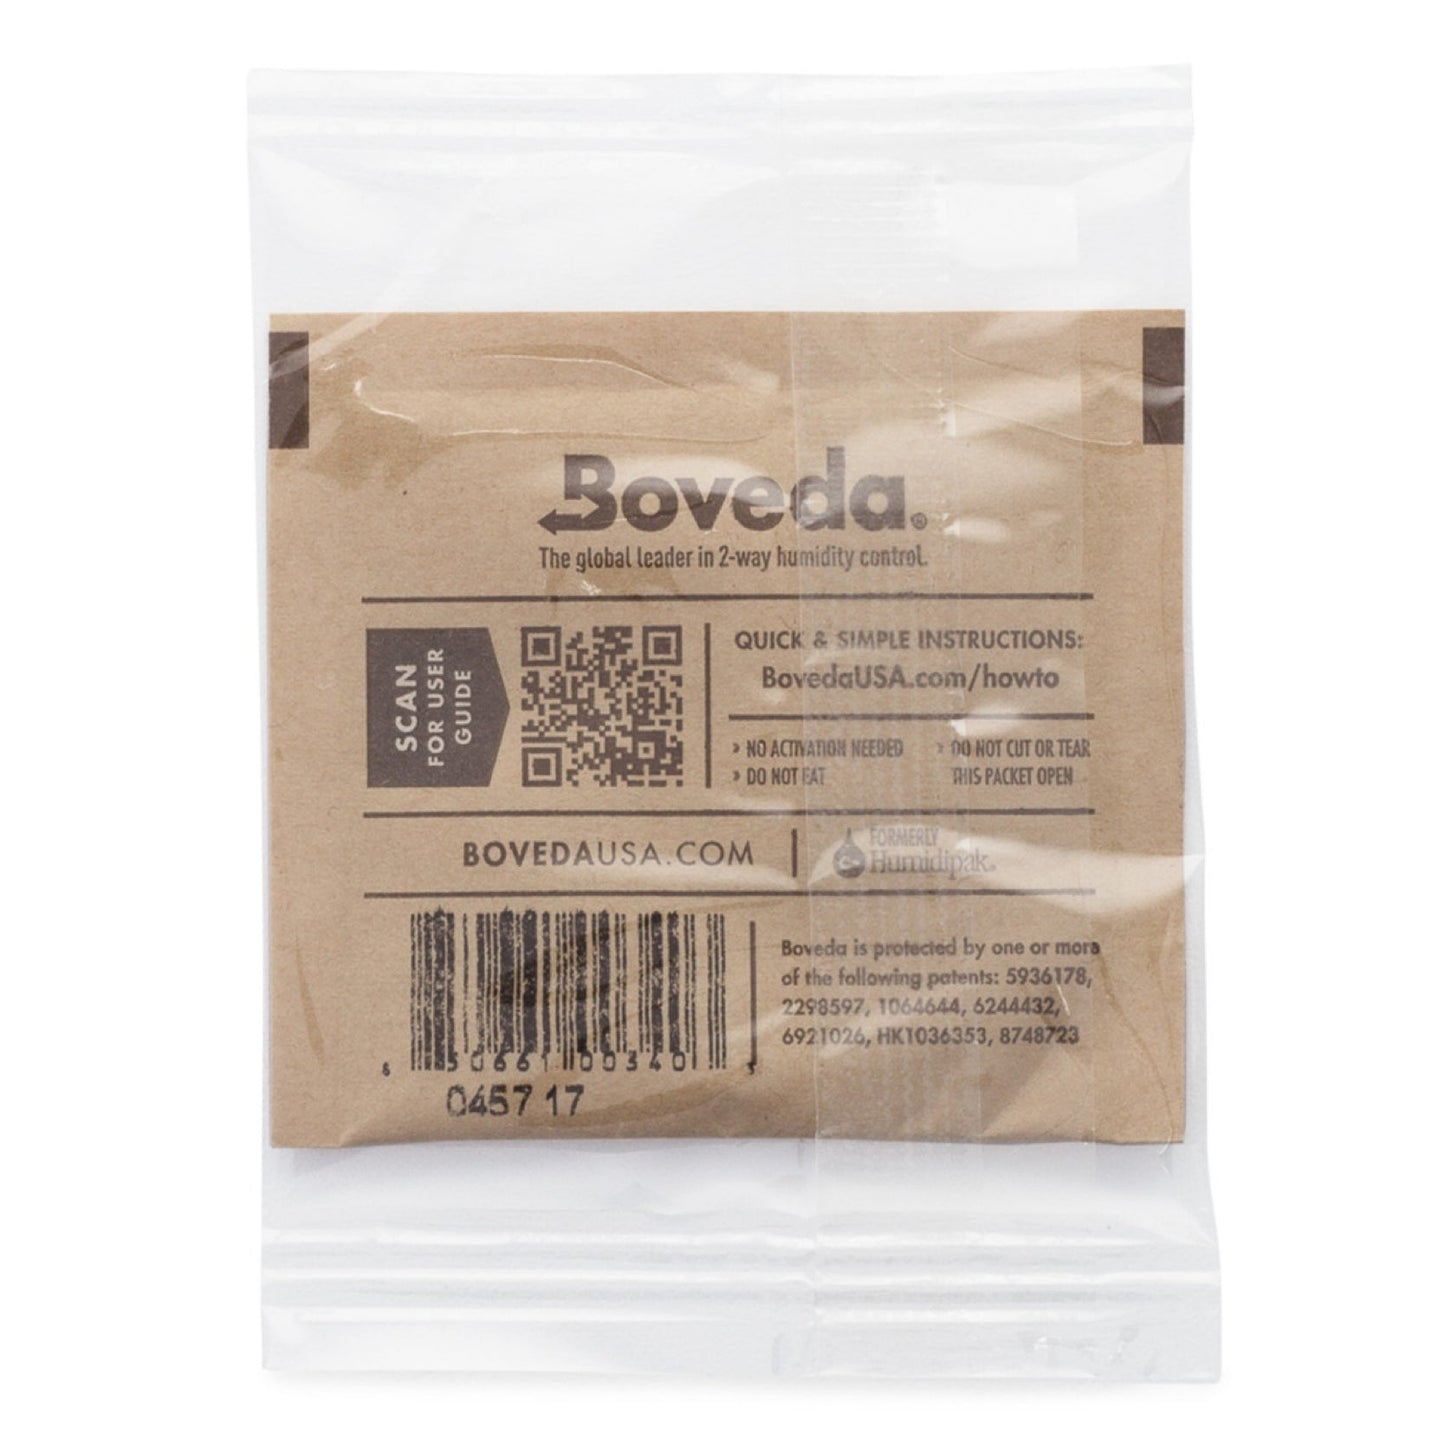 Boveda 62% 2-Way Relative Humidity Control Packs (Size 8) by Boveda Inc. | Mission Dispensary